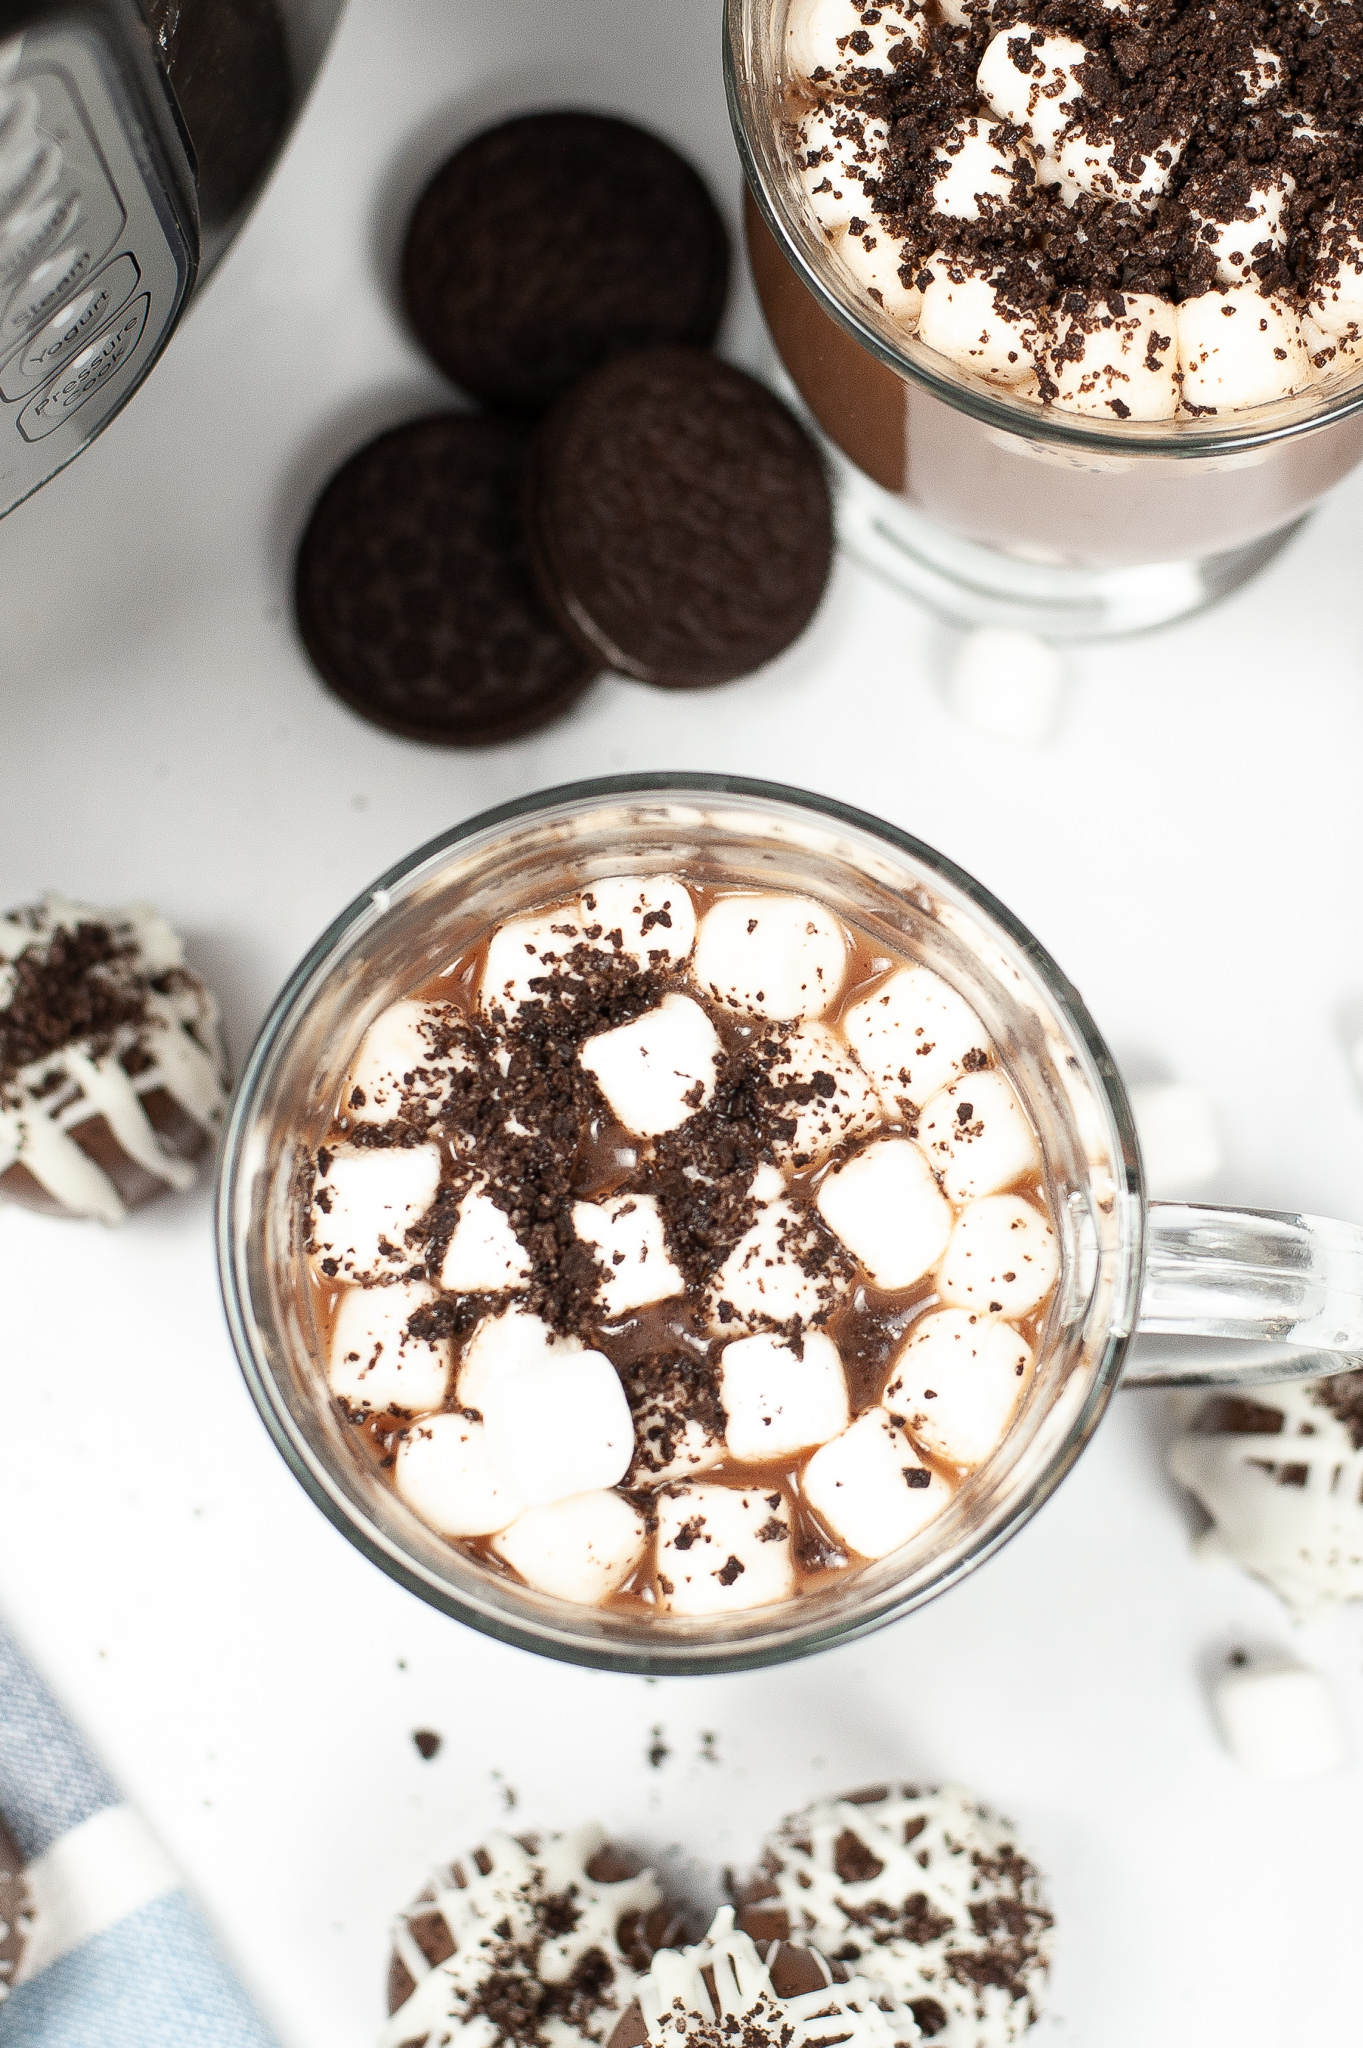 A top shot of the hot chocolate with marshmallows on top.